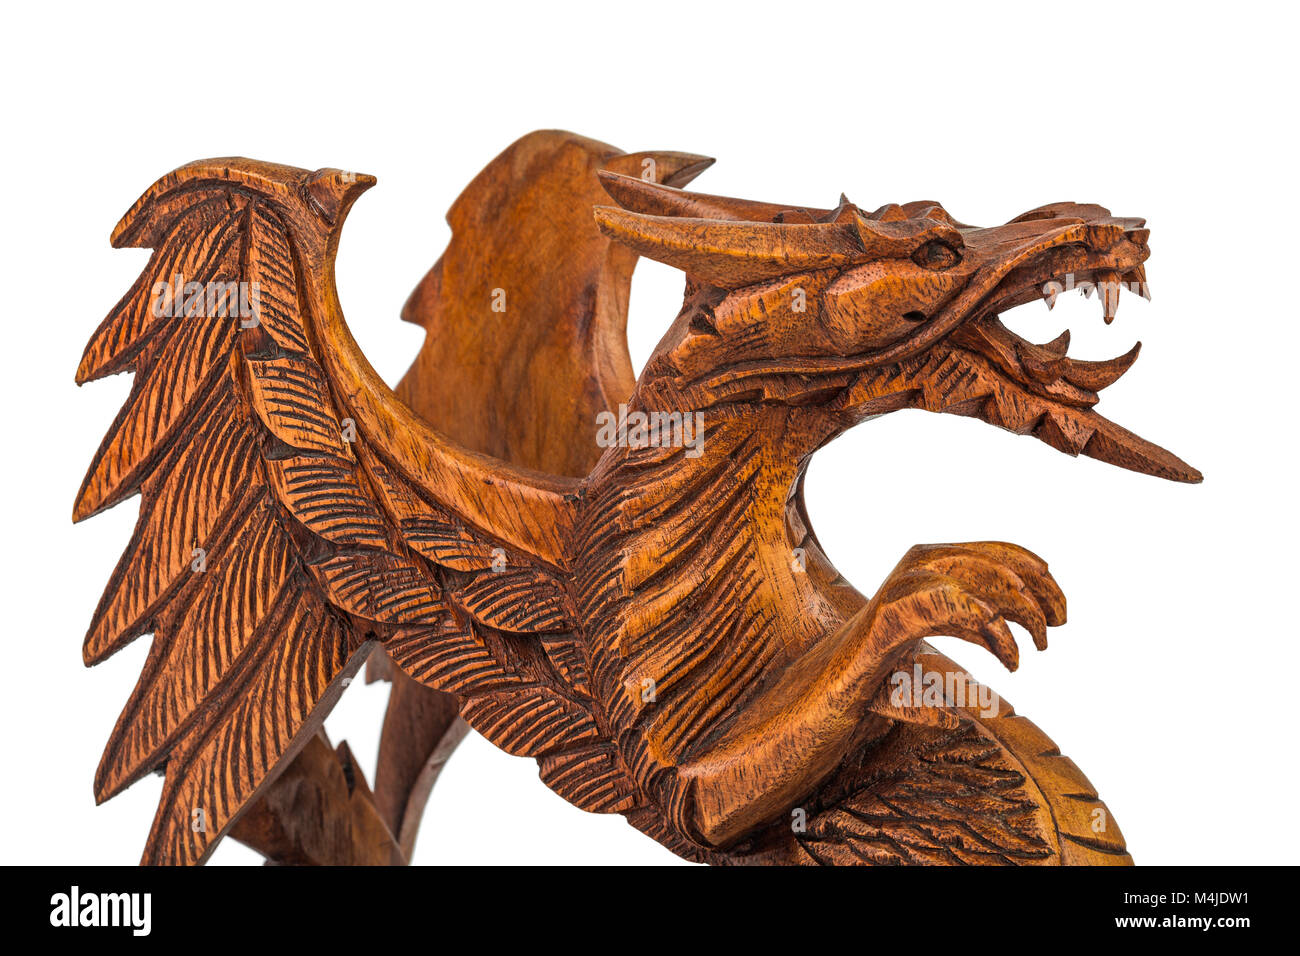 Download Wooden Dragon Wood Royalty-Free Stock Illustration Image